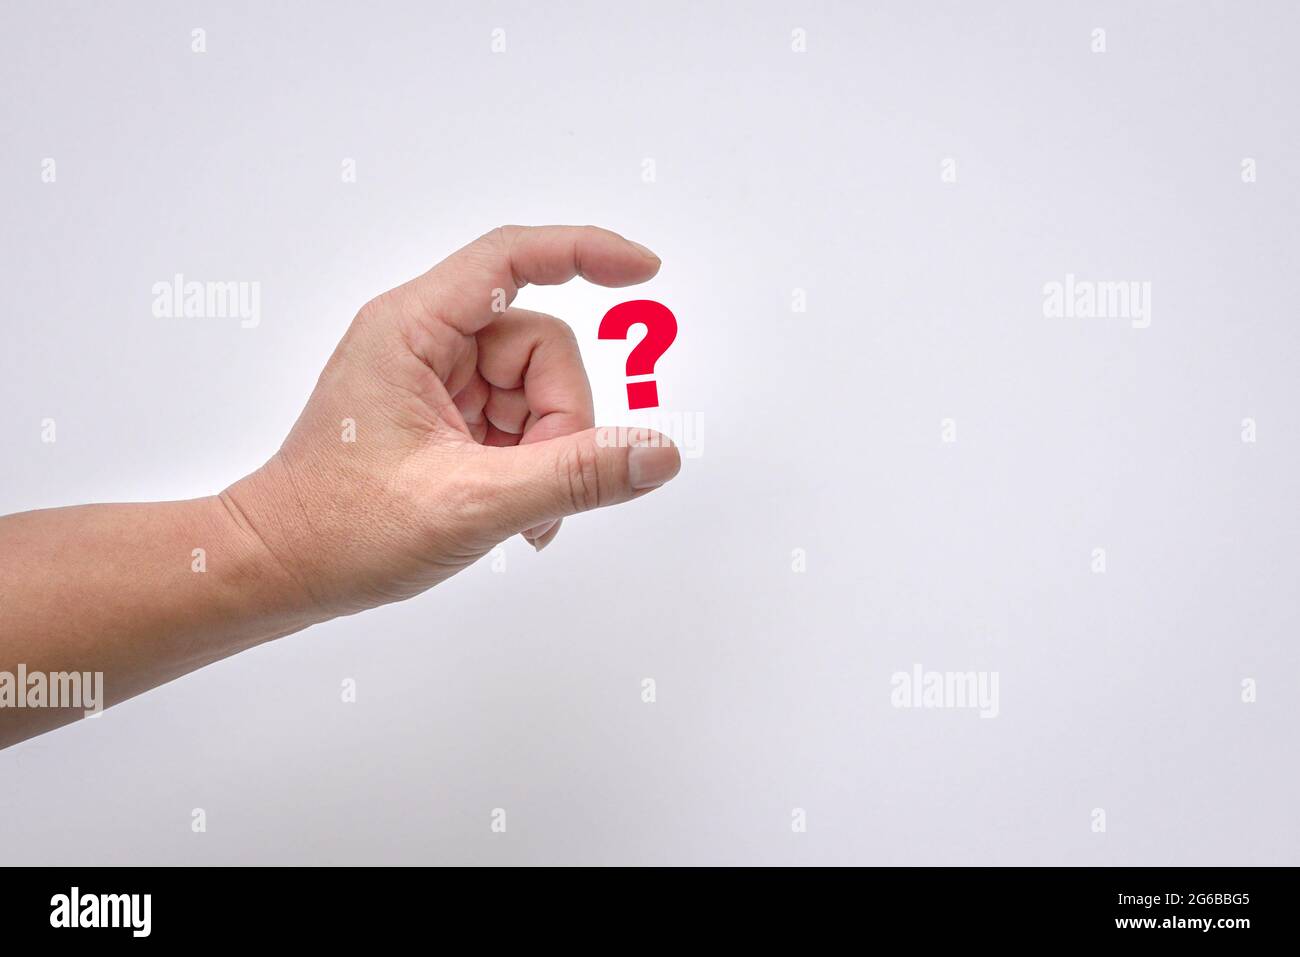 Man's fingers virtually hold a red question mark on white background. Copy space. Stock Photo